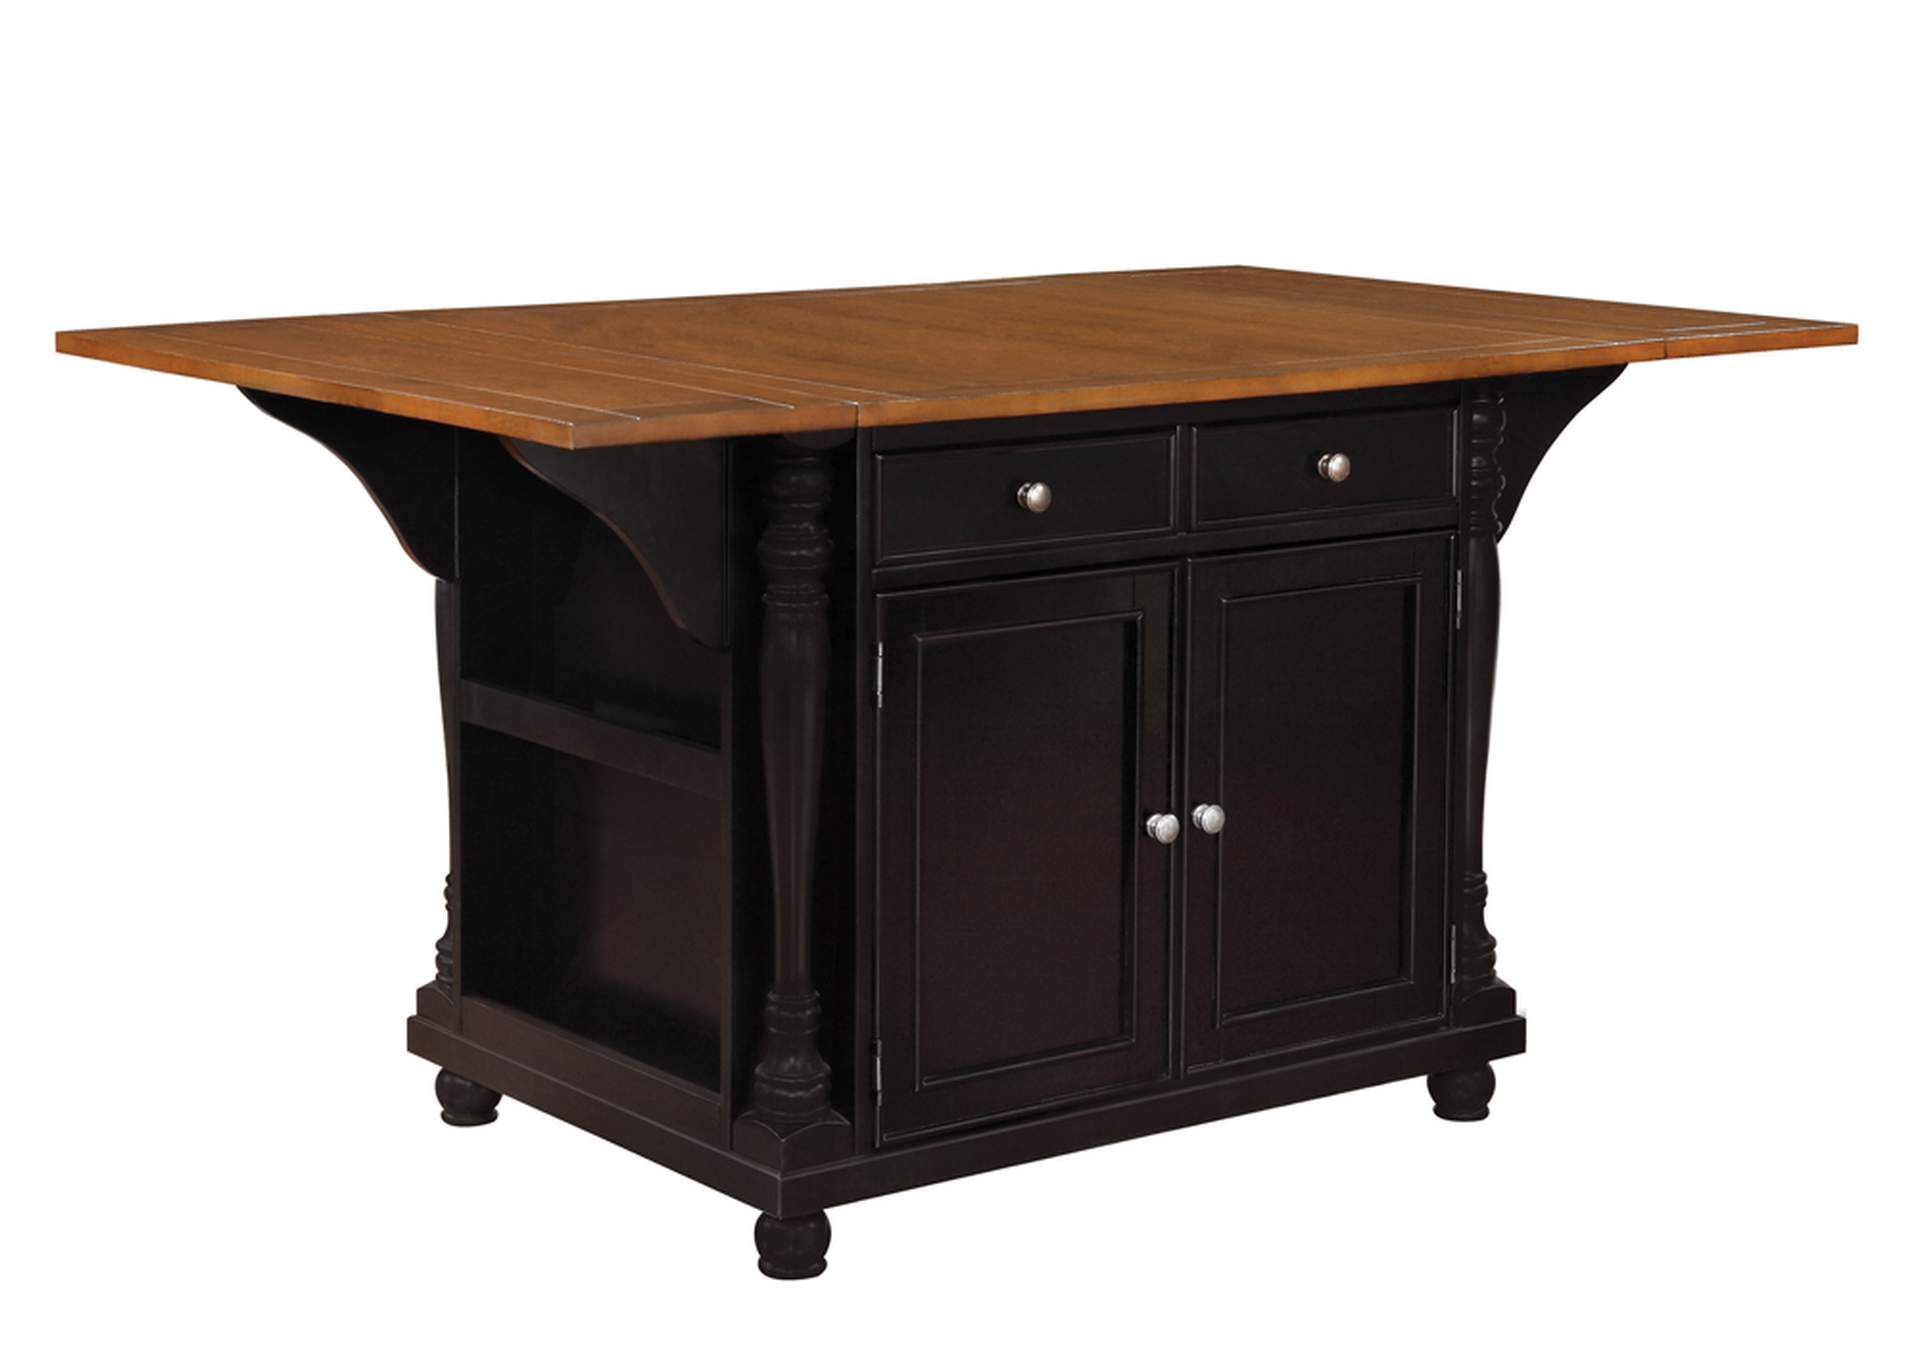 Slater 2-drawer Kitchen Island with Drop Leaves Brown and Black,Coaster Furniture